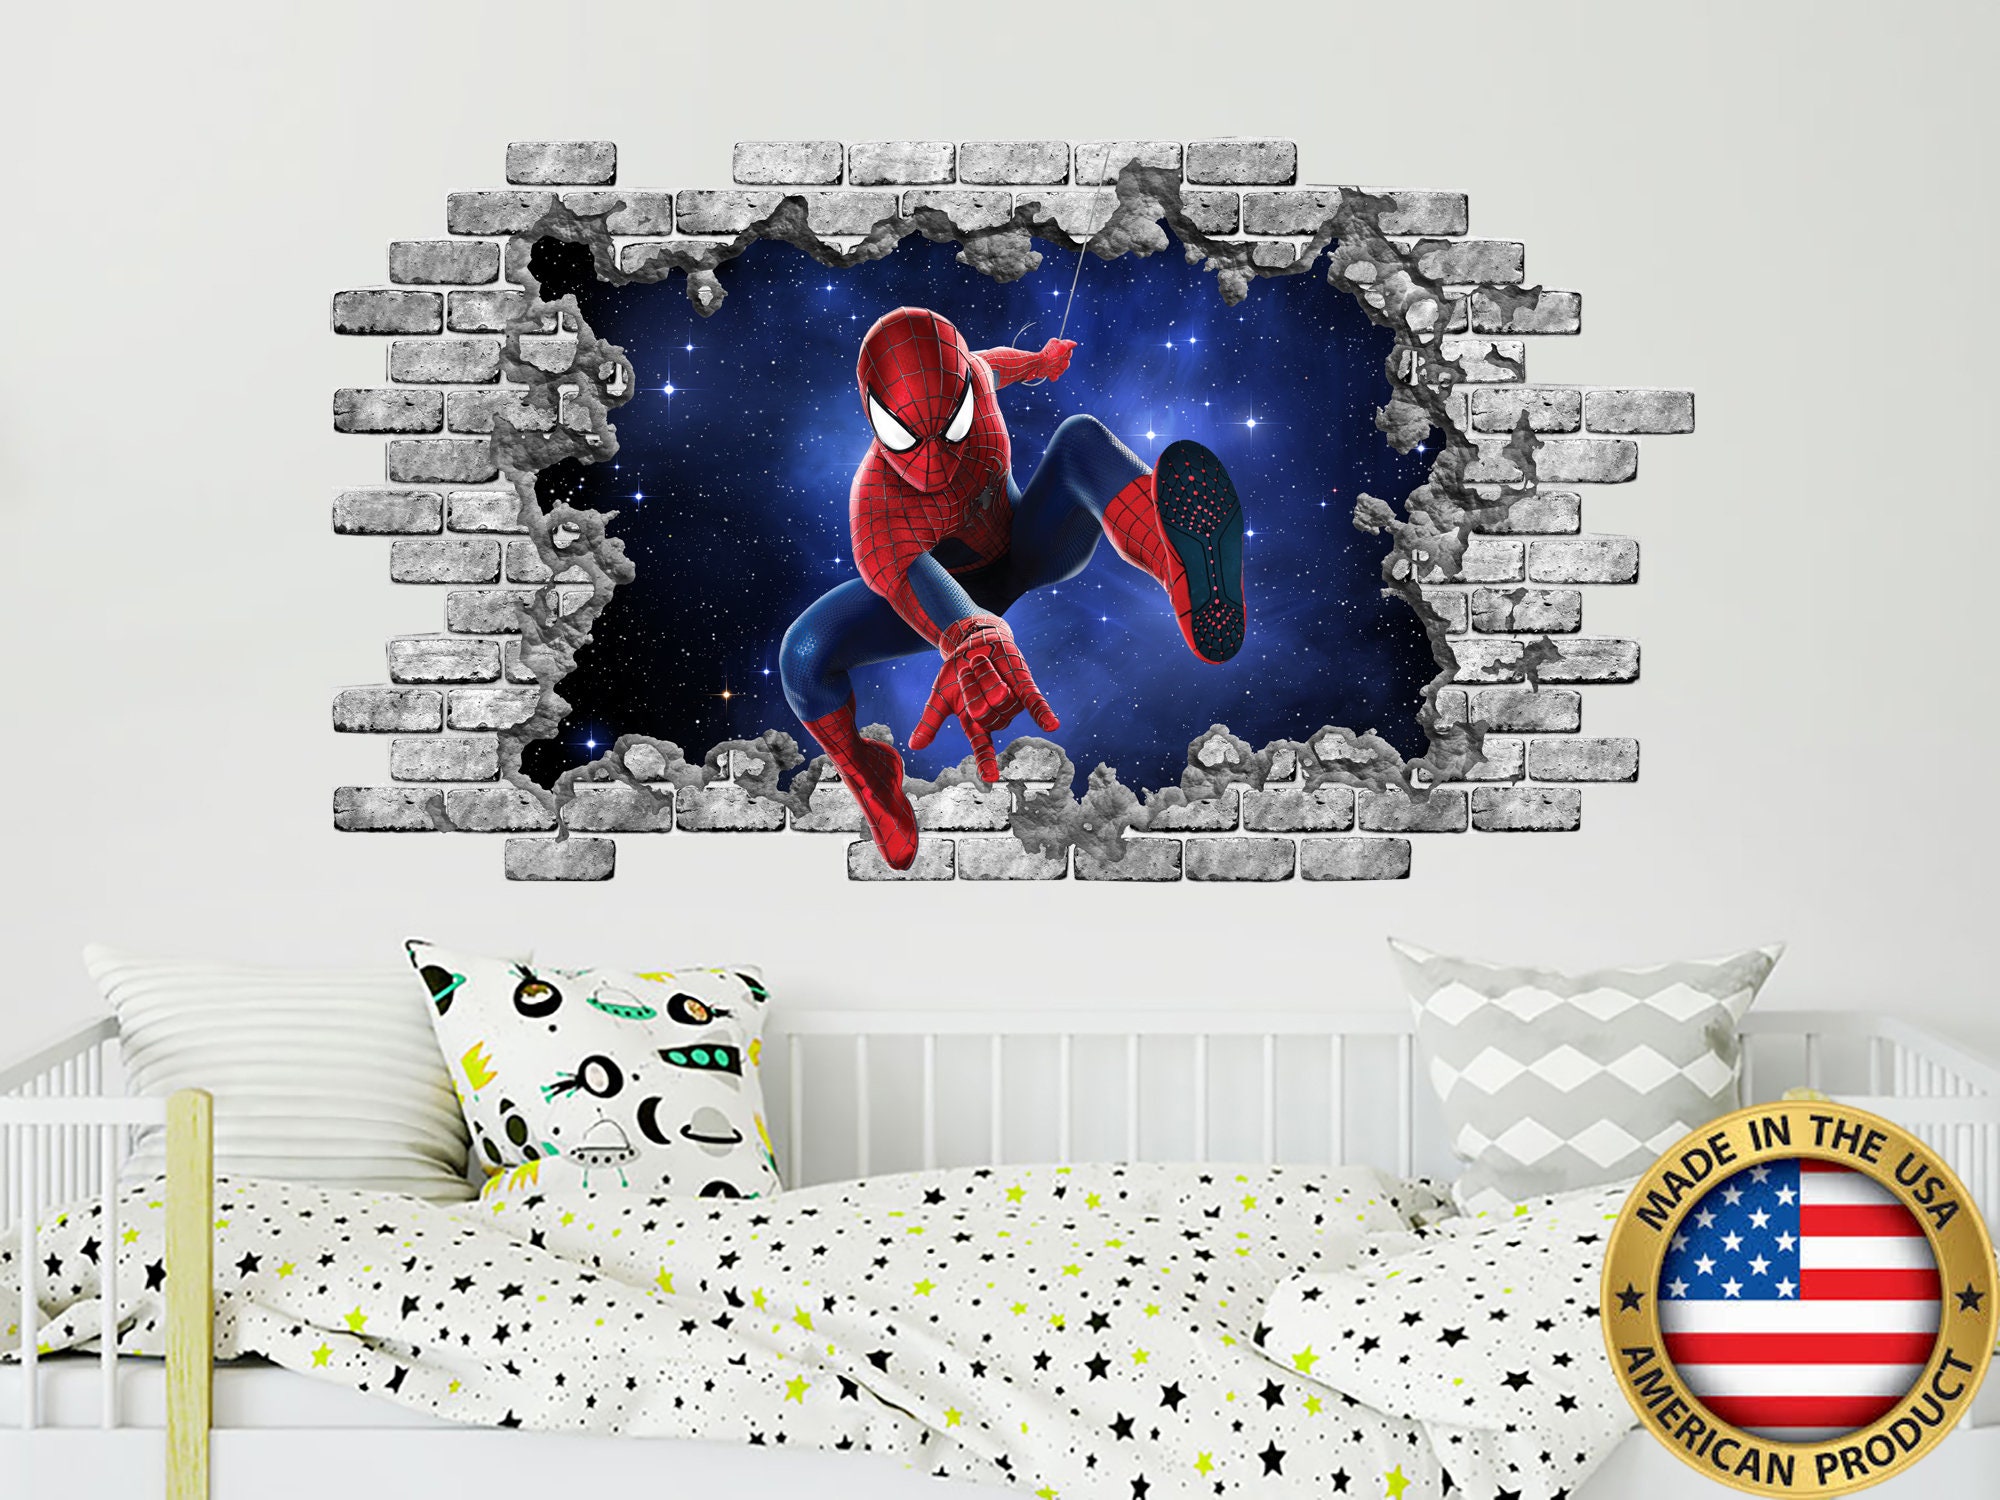 Superhero Vinyl Sticker Murals Hole in the Decal Boys Room PS224 Marvel Comics Wall Sticker 3D Spiderman Wall Decal 